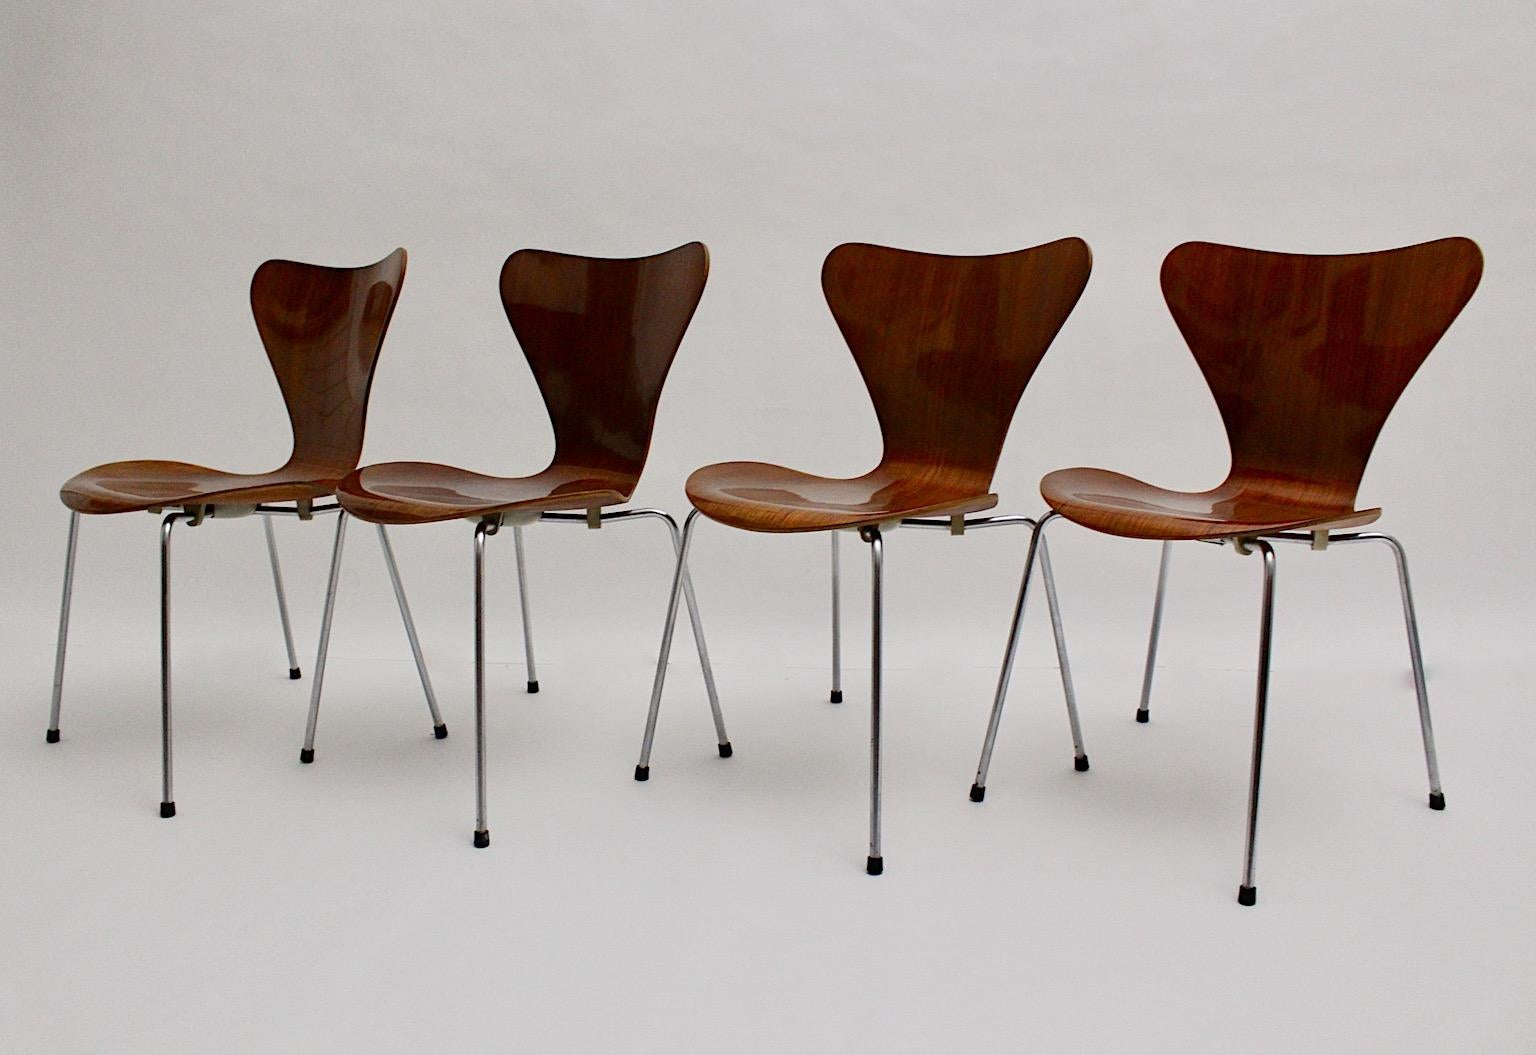 Modernist Mid Century Modern vintage authentic dining chairs model set of four ( 4 ) Model Number 3107 designed by Arne Jacobsen, circa 1955 and produced by Fritz Hansen, Denmark, 1960s.
Labeled underneath with company´s name
The seat shell was made